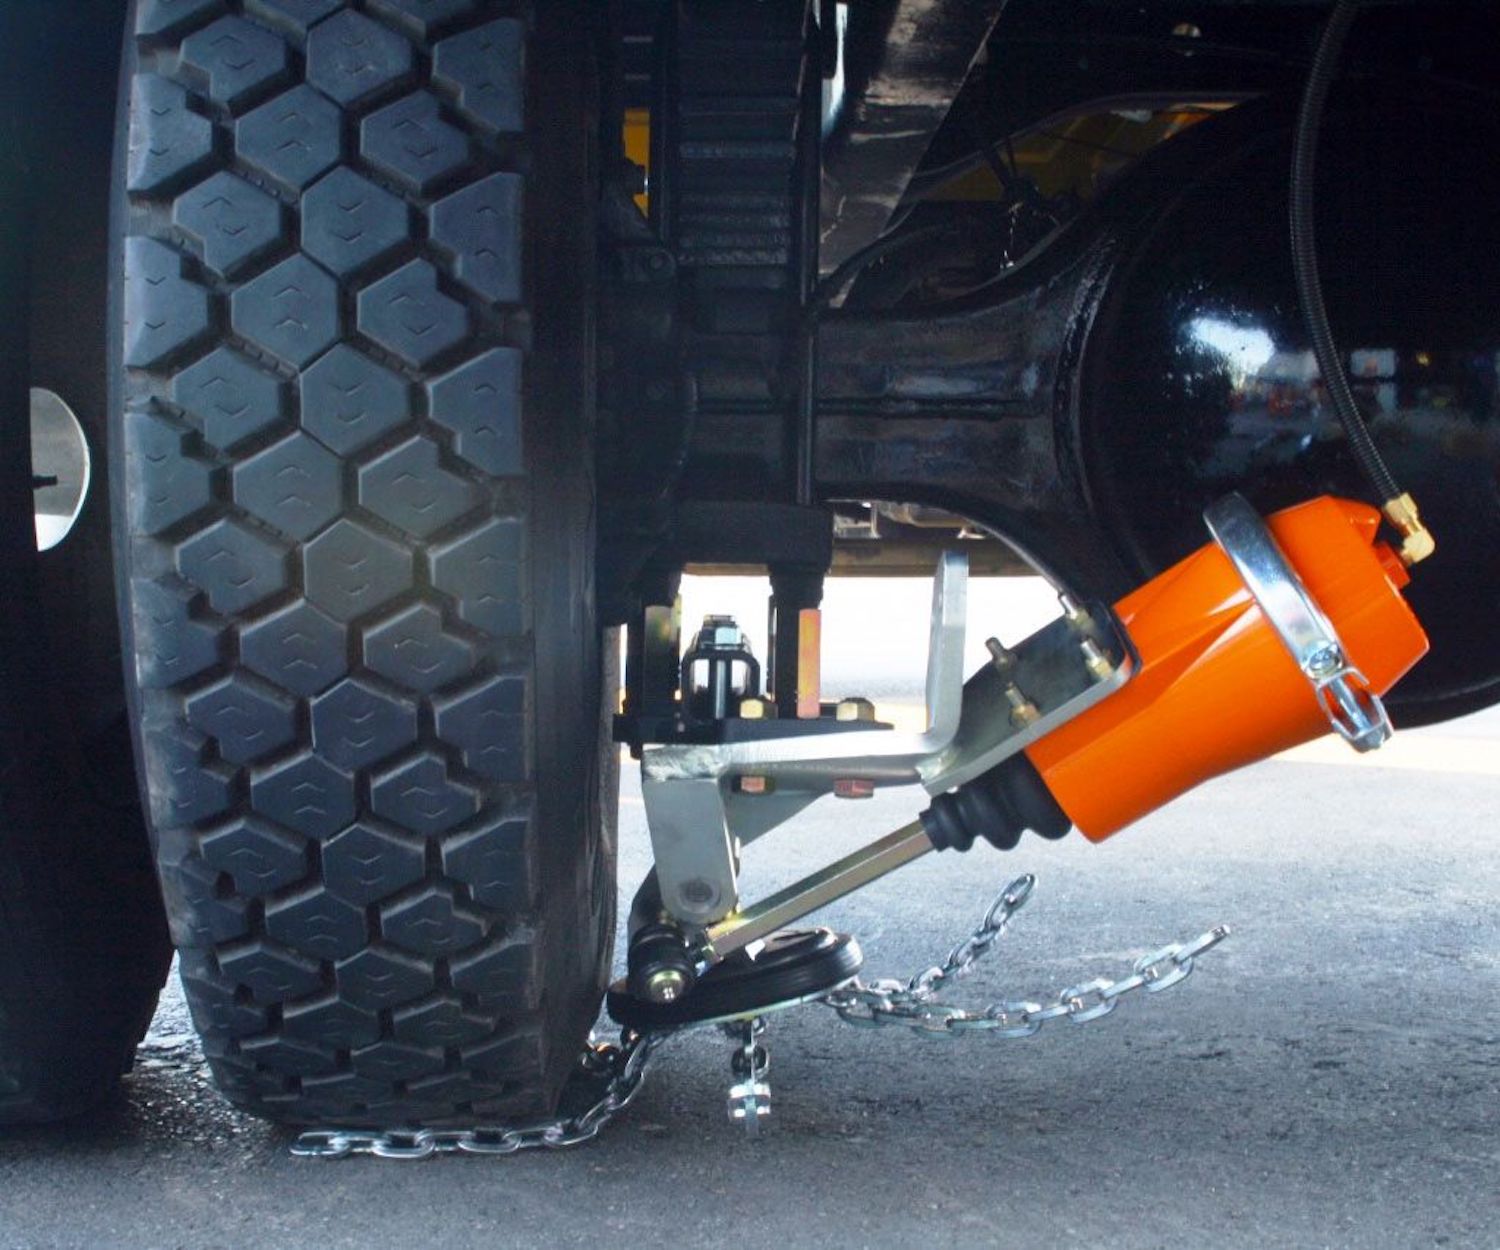 This is a set of automatic tire chains in action.